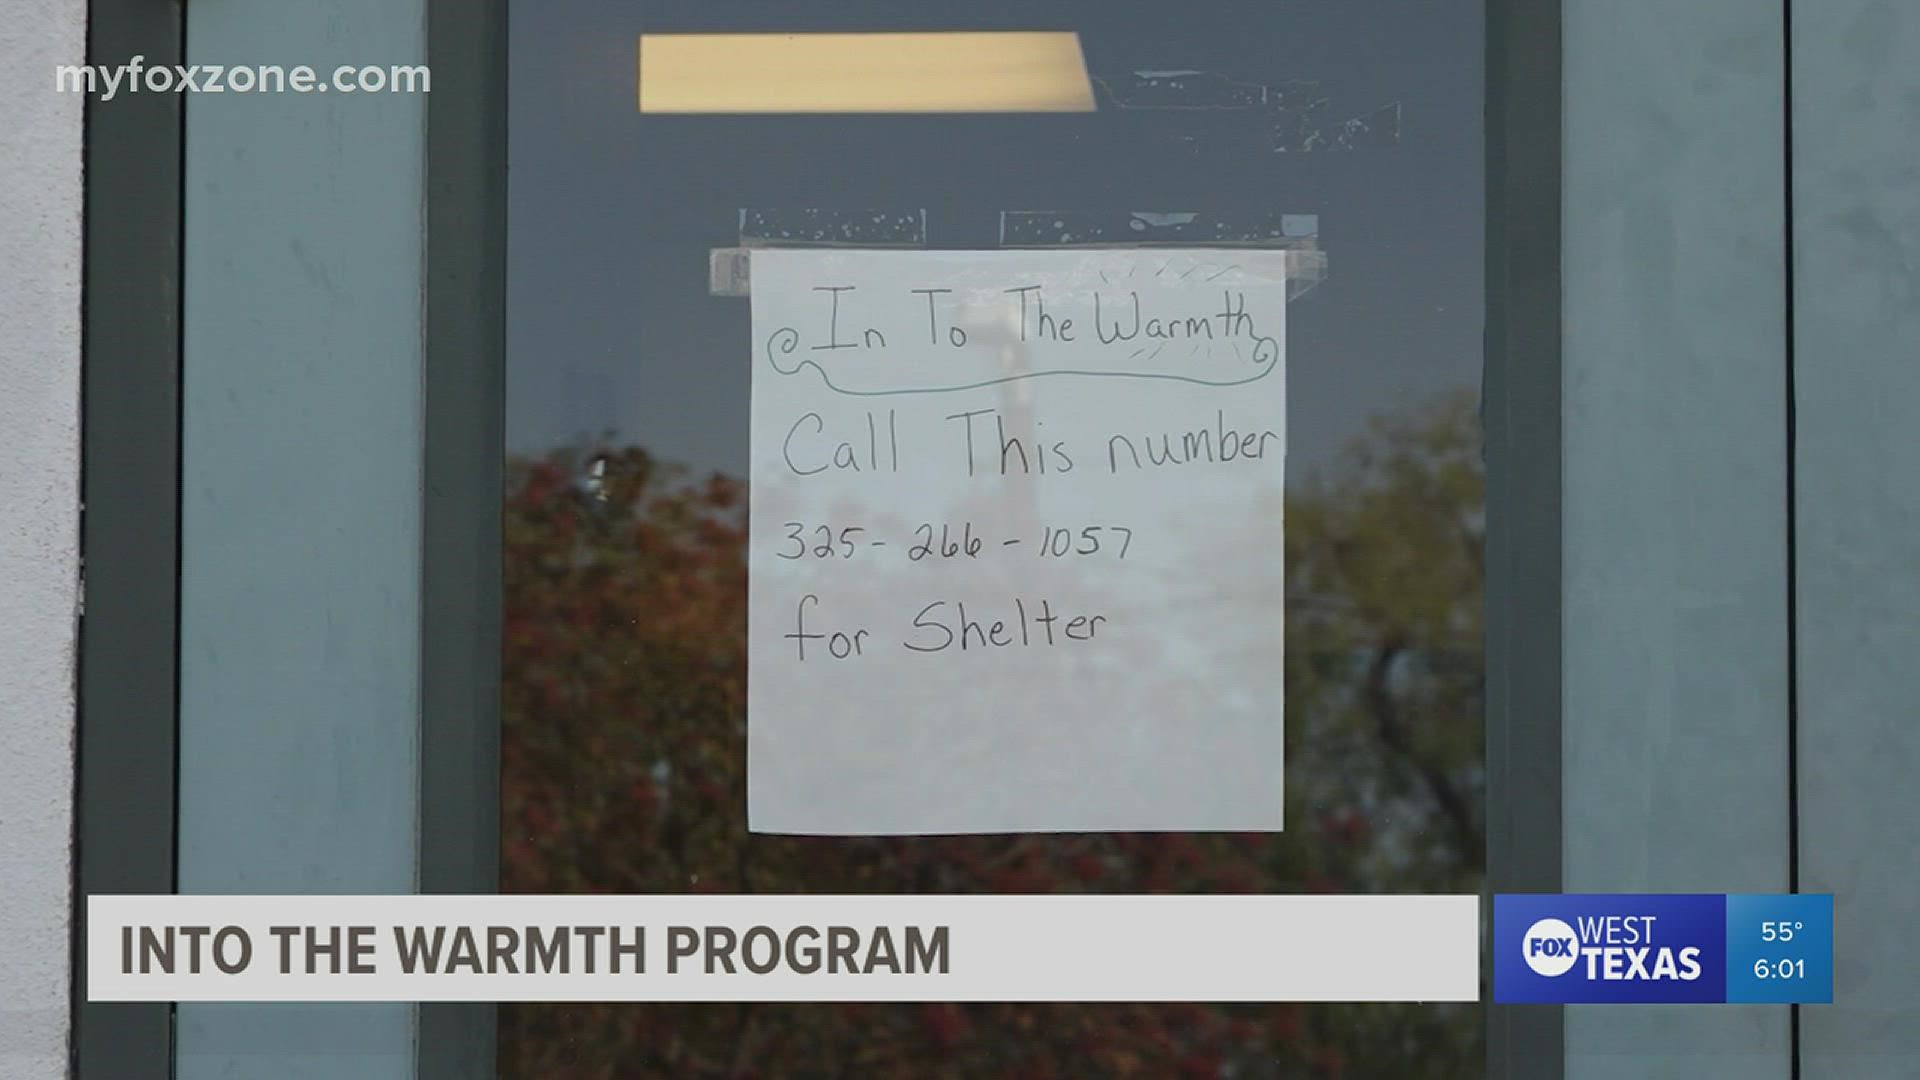 The program provides shelter to people when nighttime wind chill factors are predicted to be below 35 degrees.